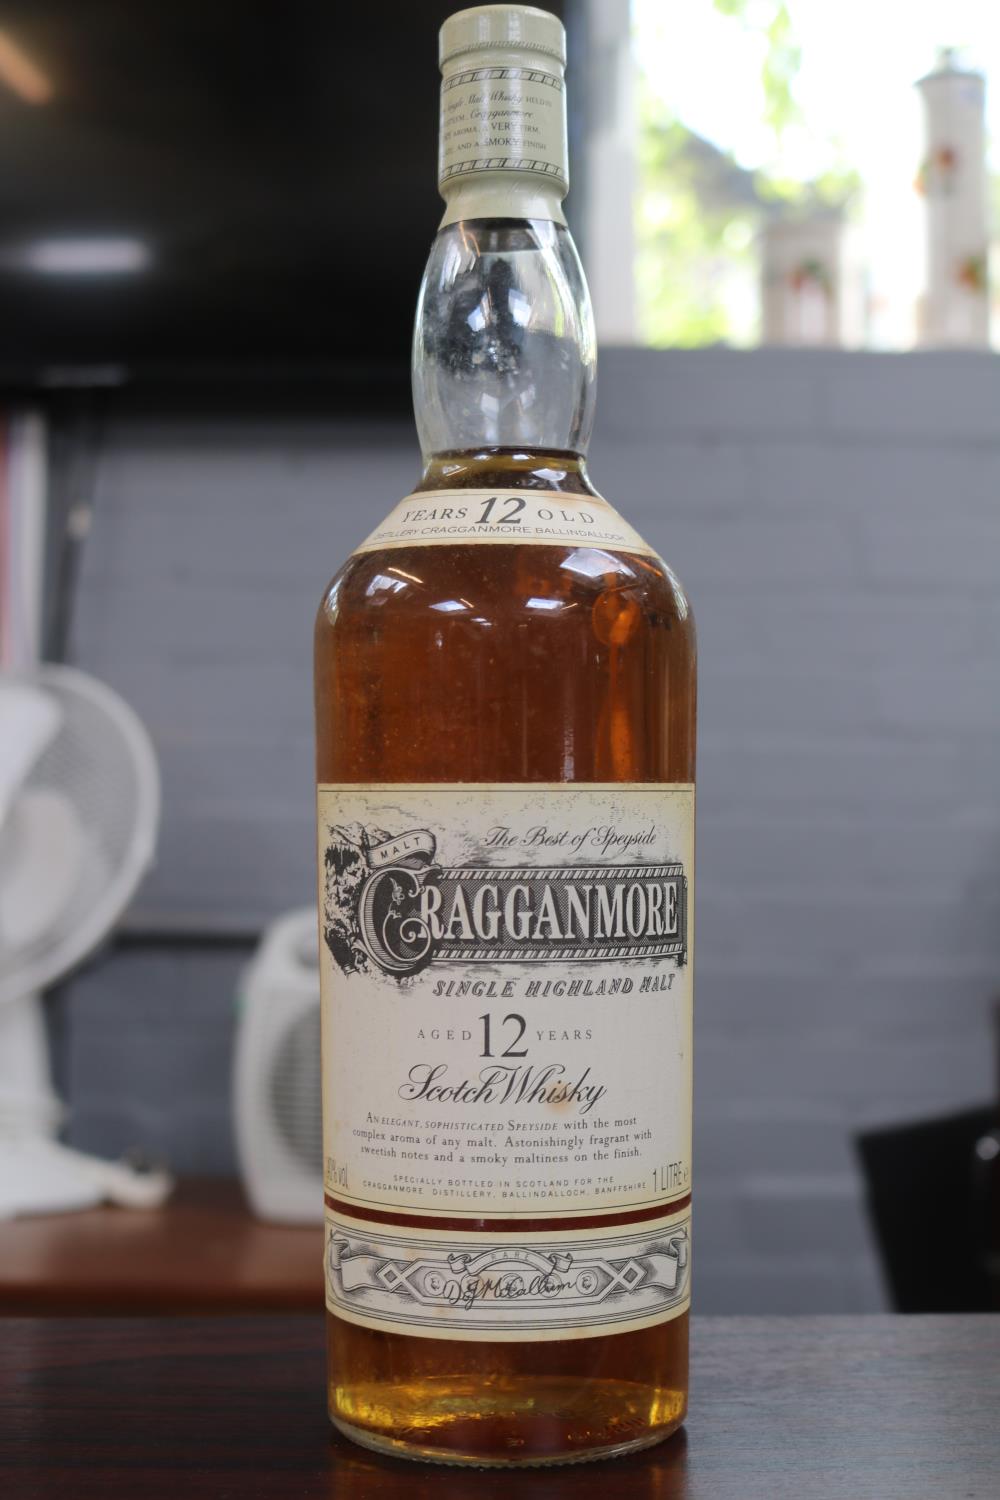 Cragganmore Single Highland Malt Aged 12 Years Scotch Whisky 1 Litre